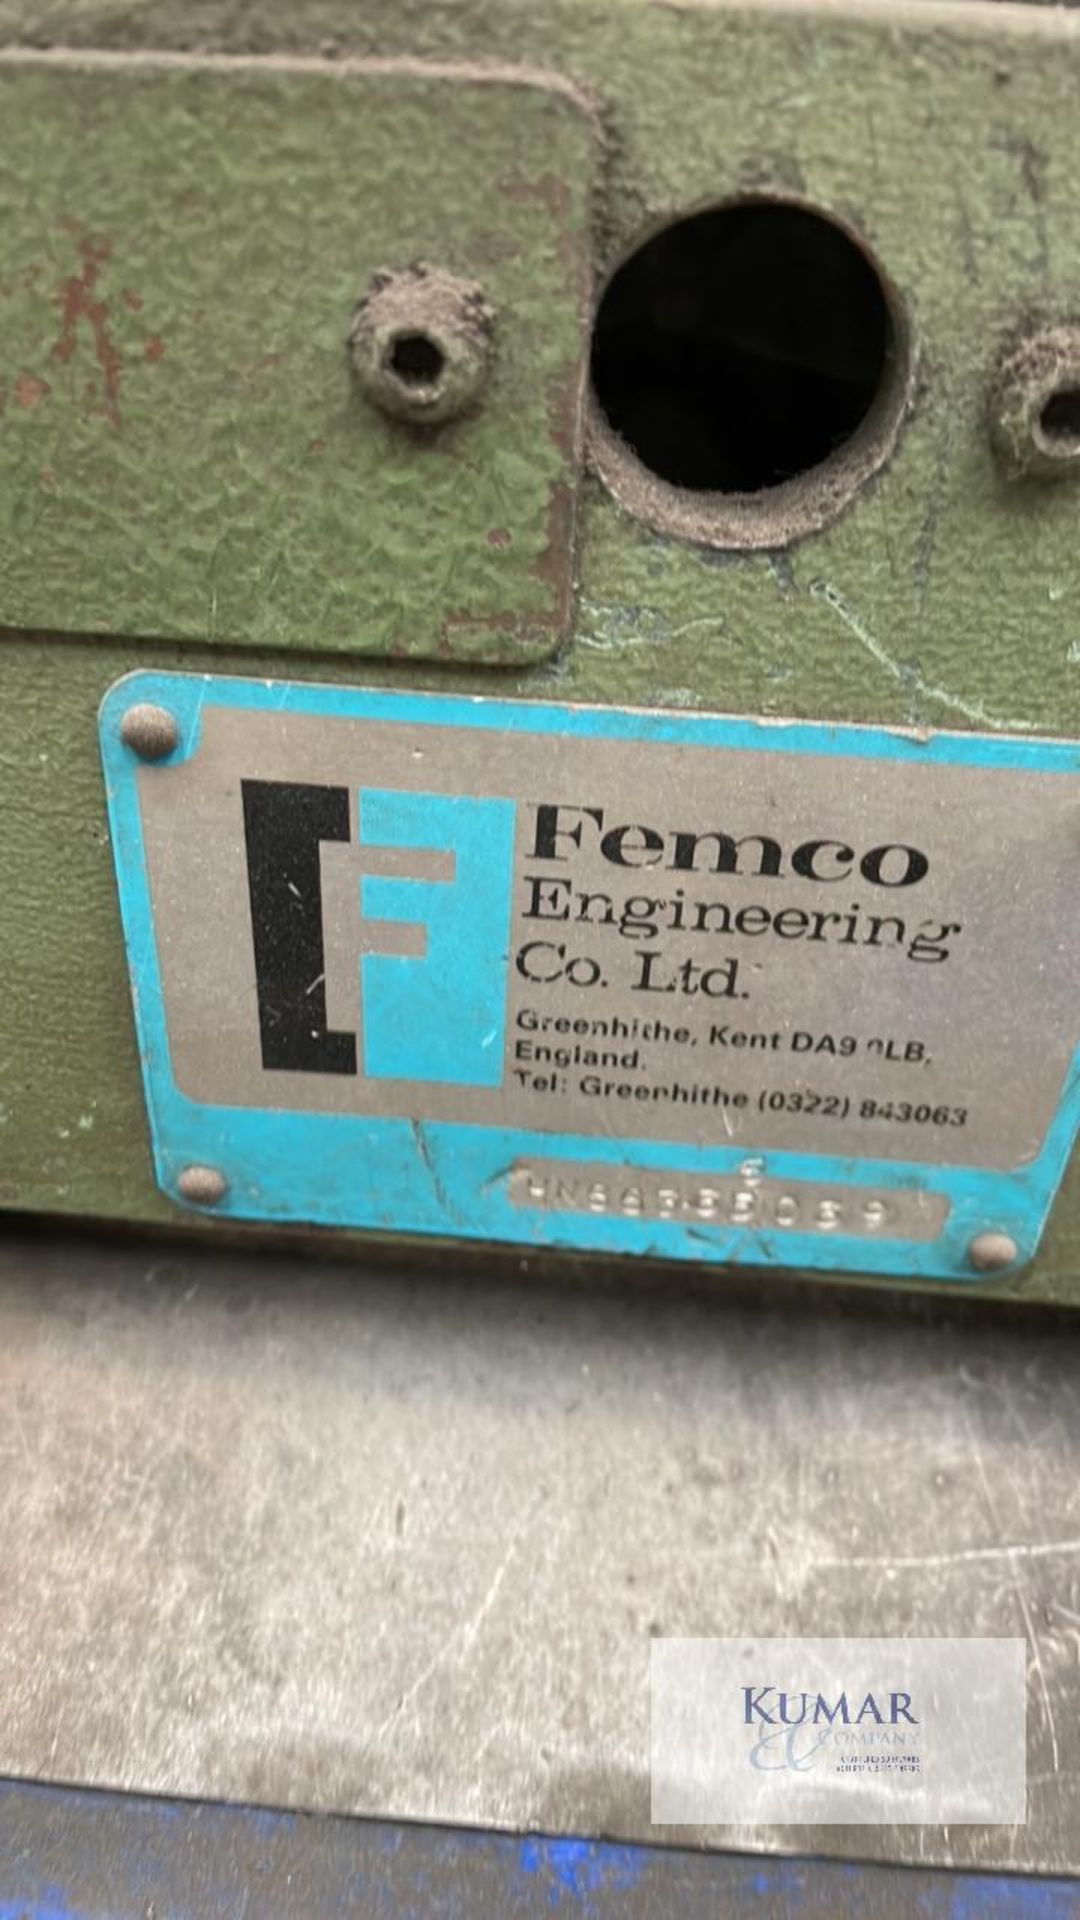 Femco Engineering Treadle Operated Hydronotch Machine Serial HN6535039 - Image 4 of 4